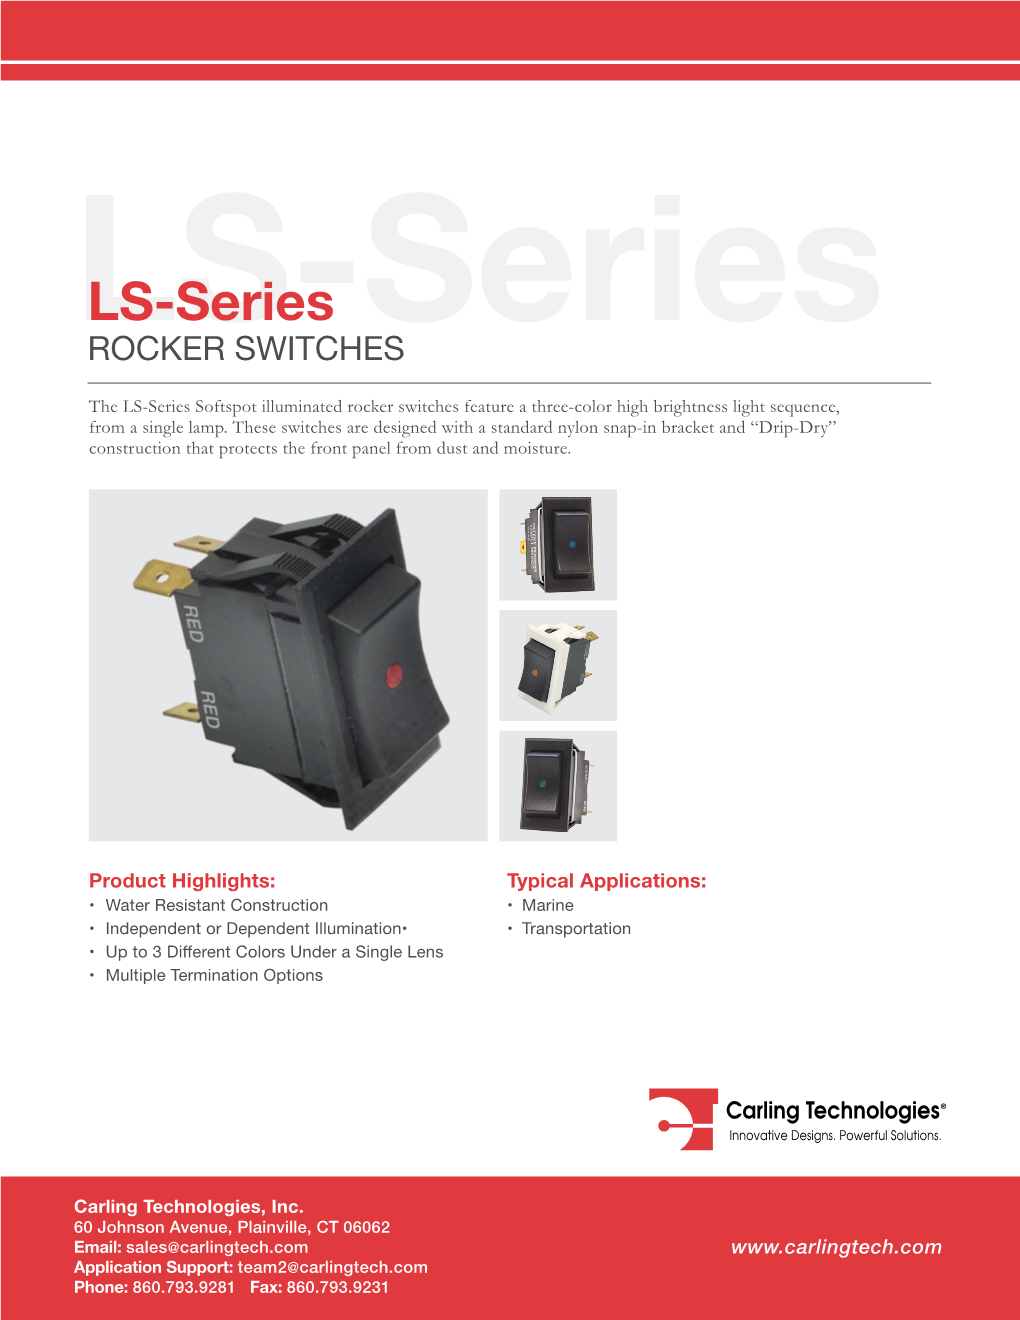 LS-Series LS-Seriesrocker SWITCHES the LS-Series Softspot Illuminated Rocker Switches Feature a Three-Color High Brightness Light Sequence, from a Single Lamp